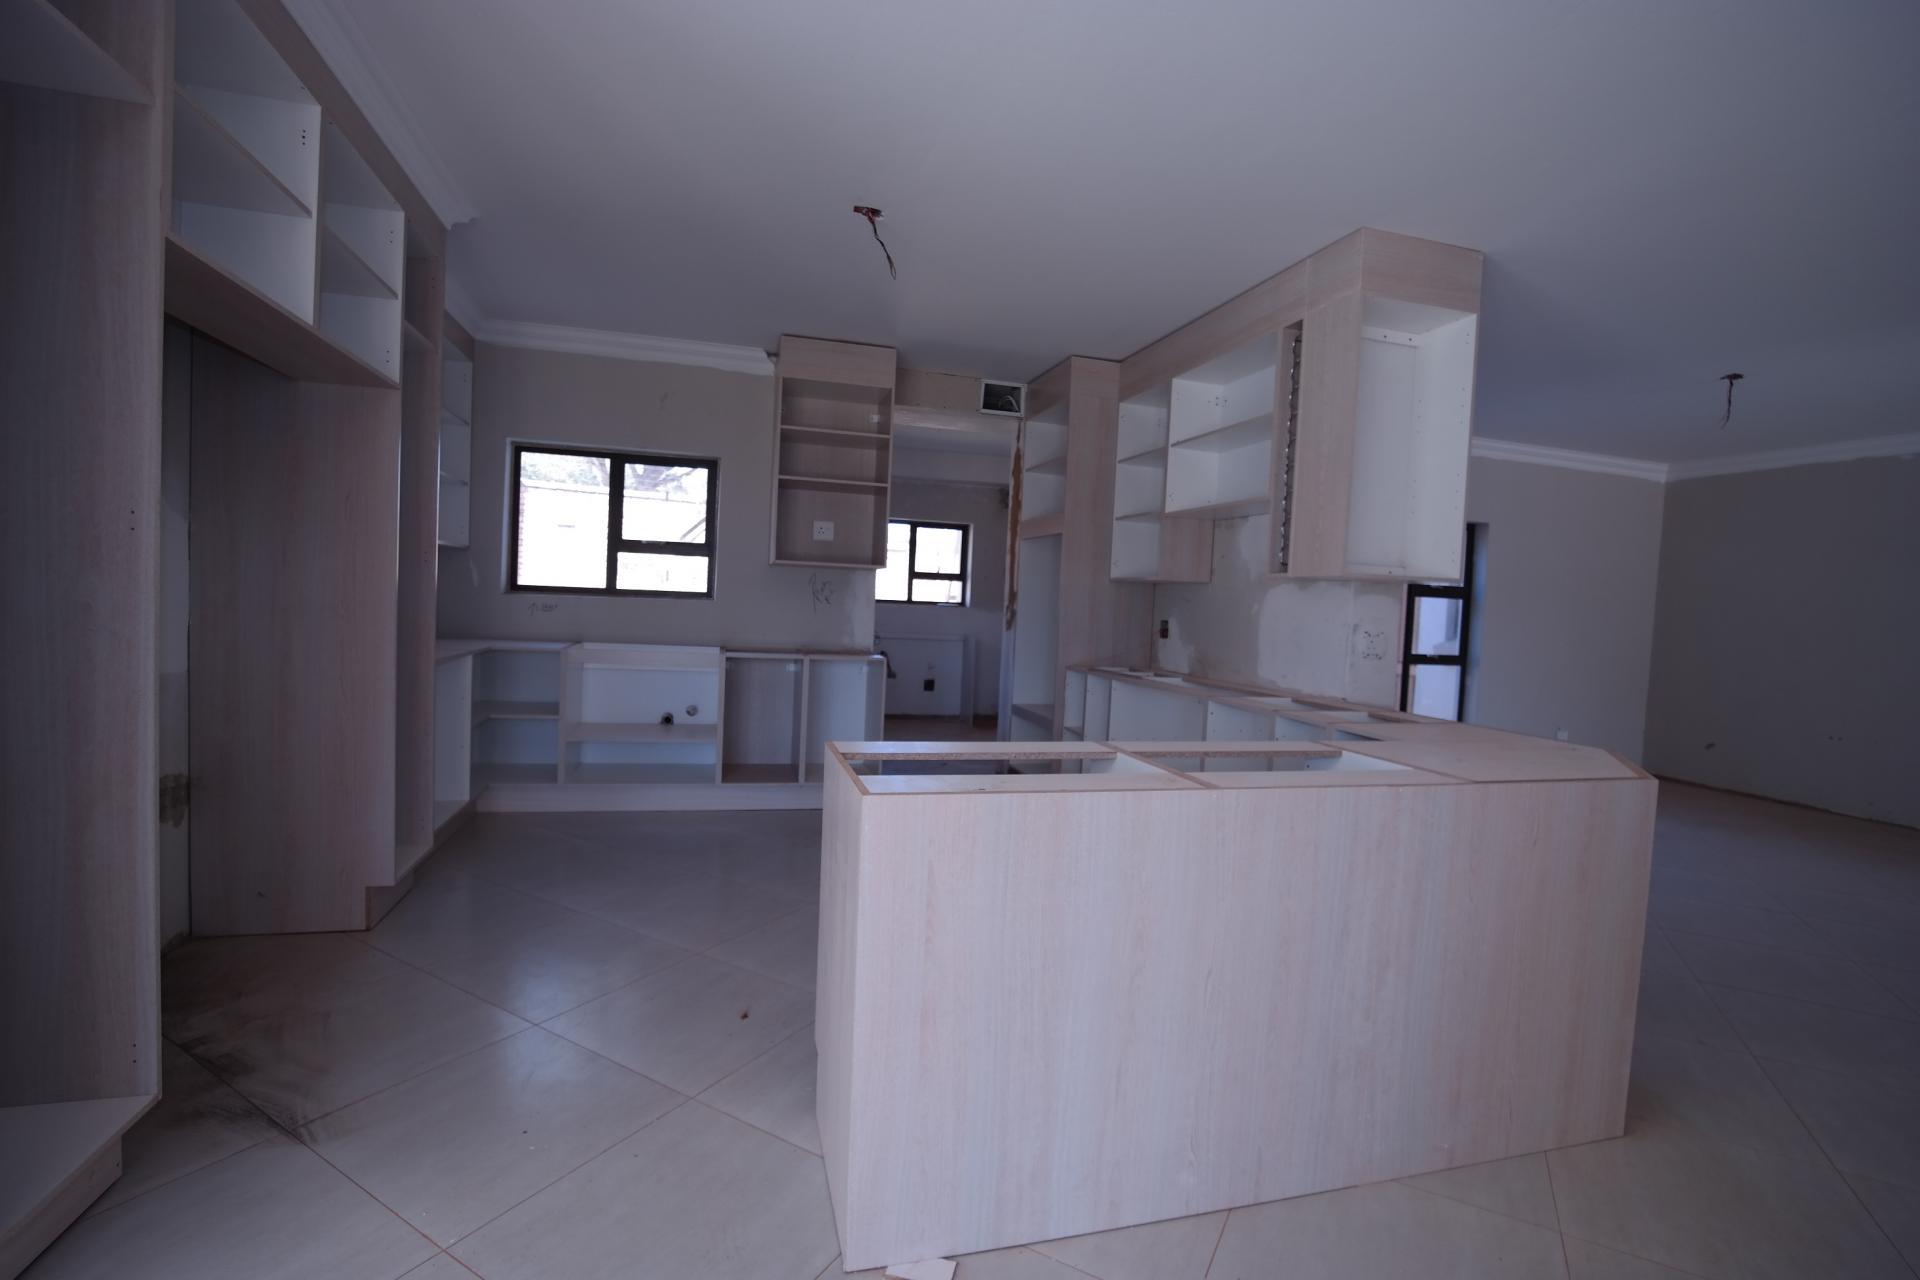 Kitchen - 31 square meters of property in The Wilds Estate